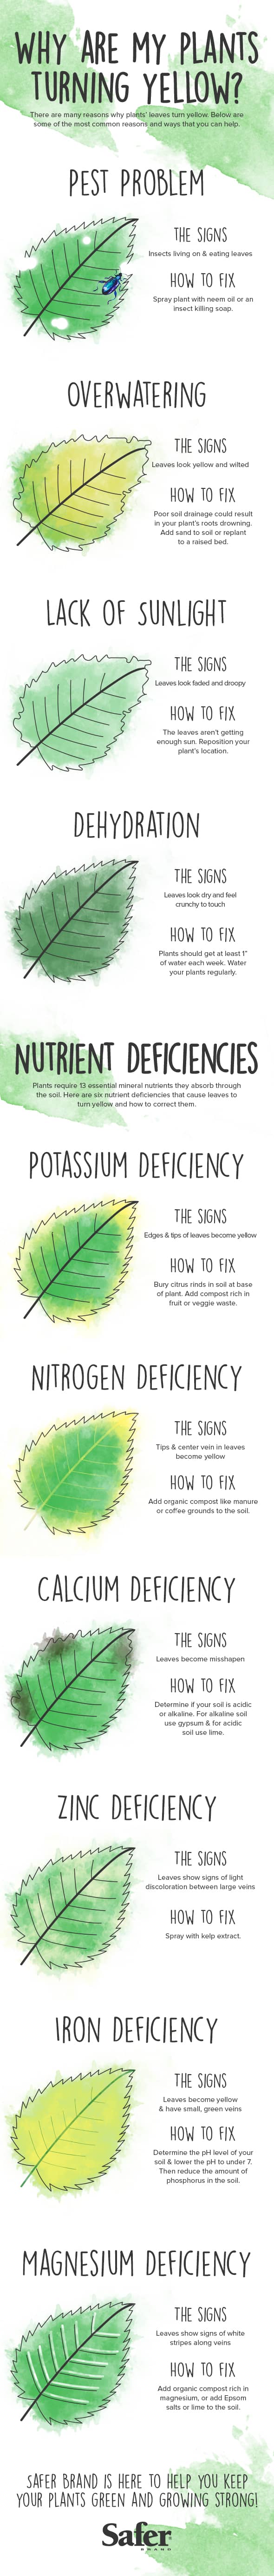 Plants guide infographic